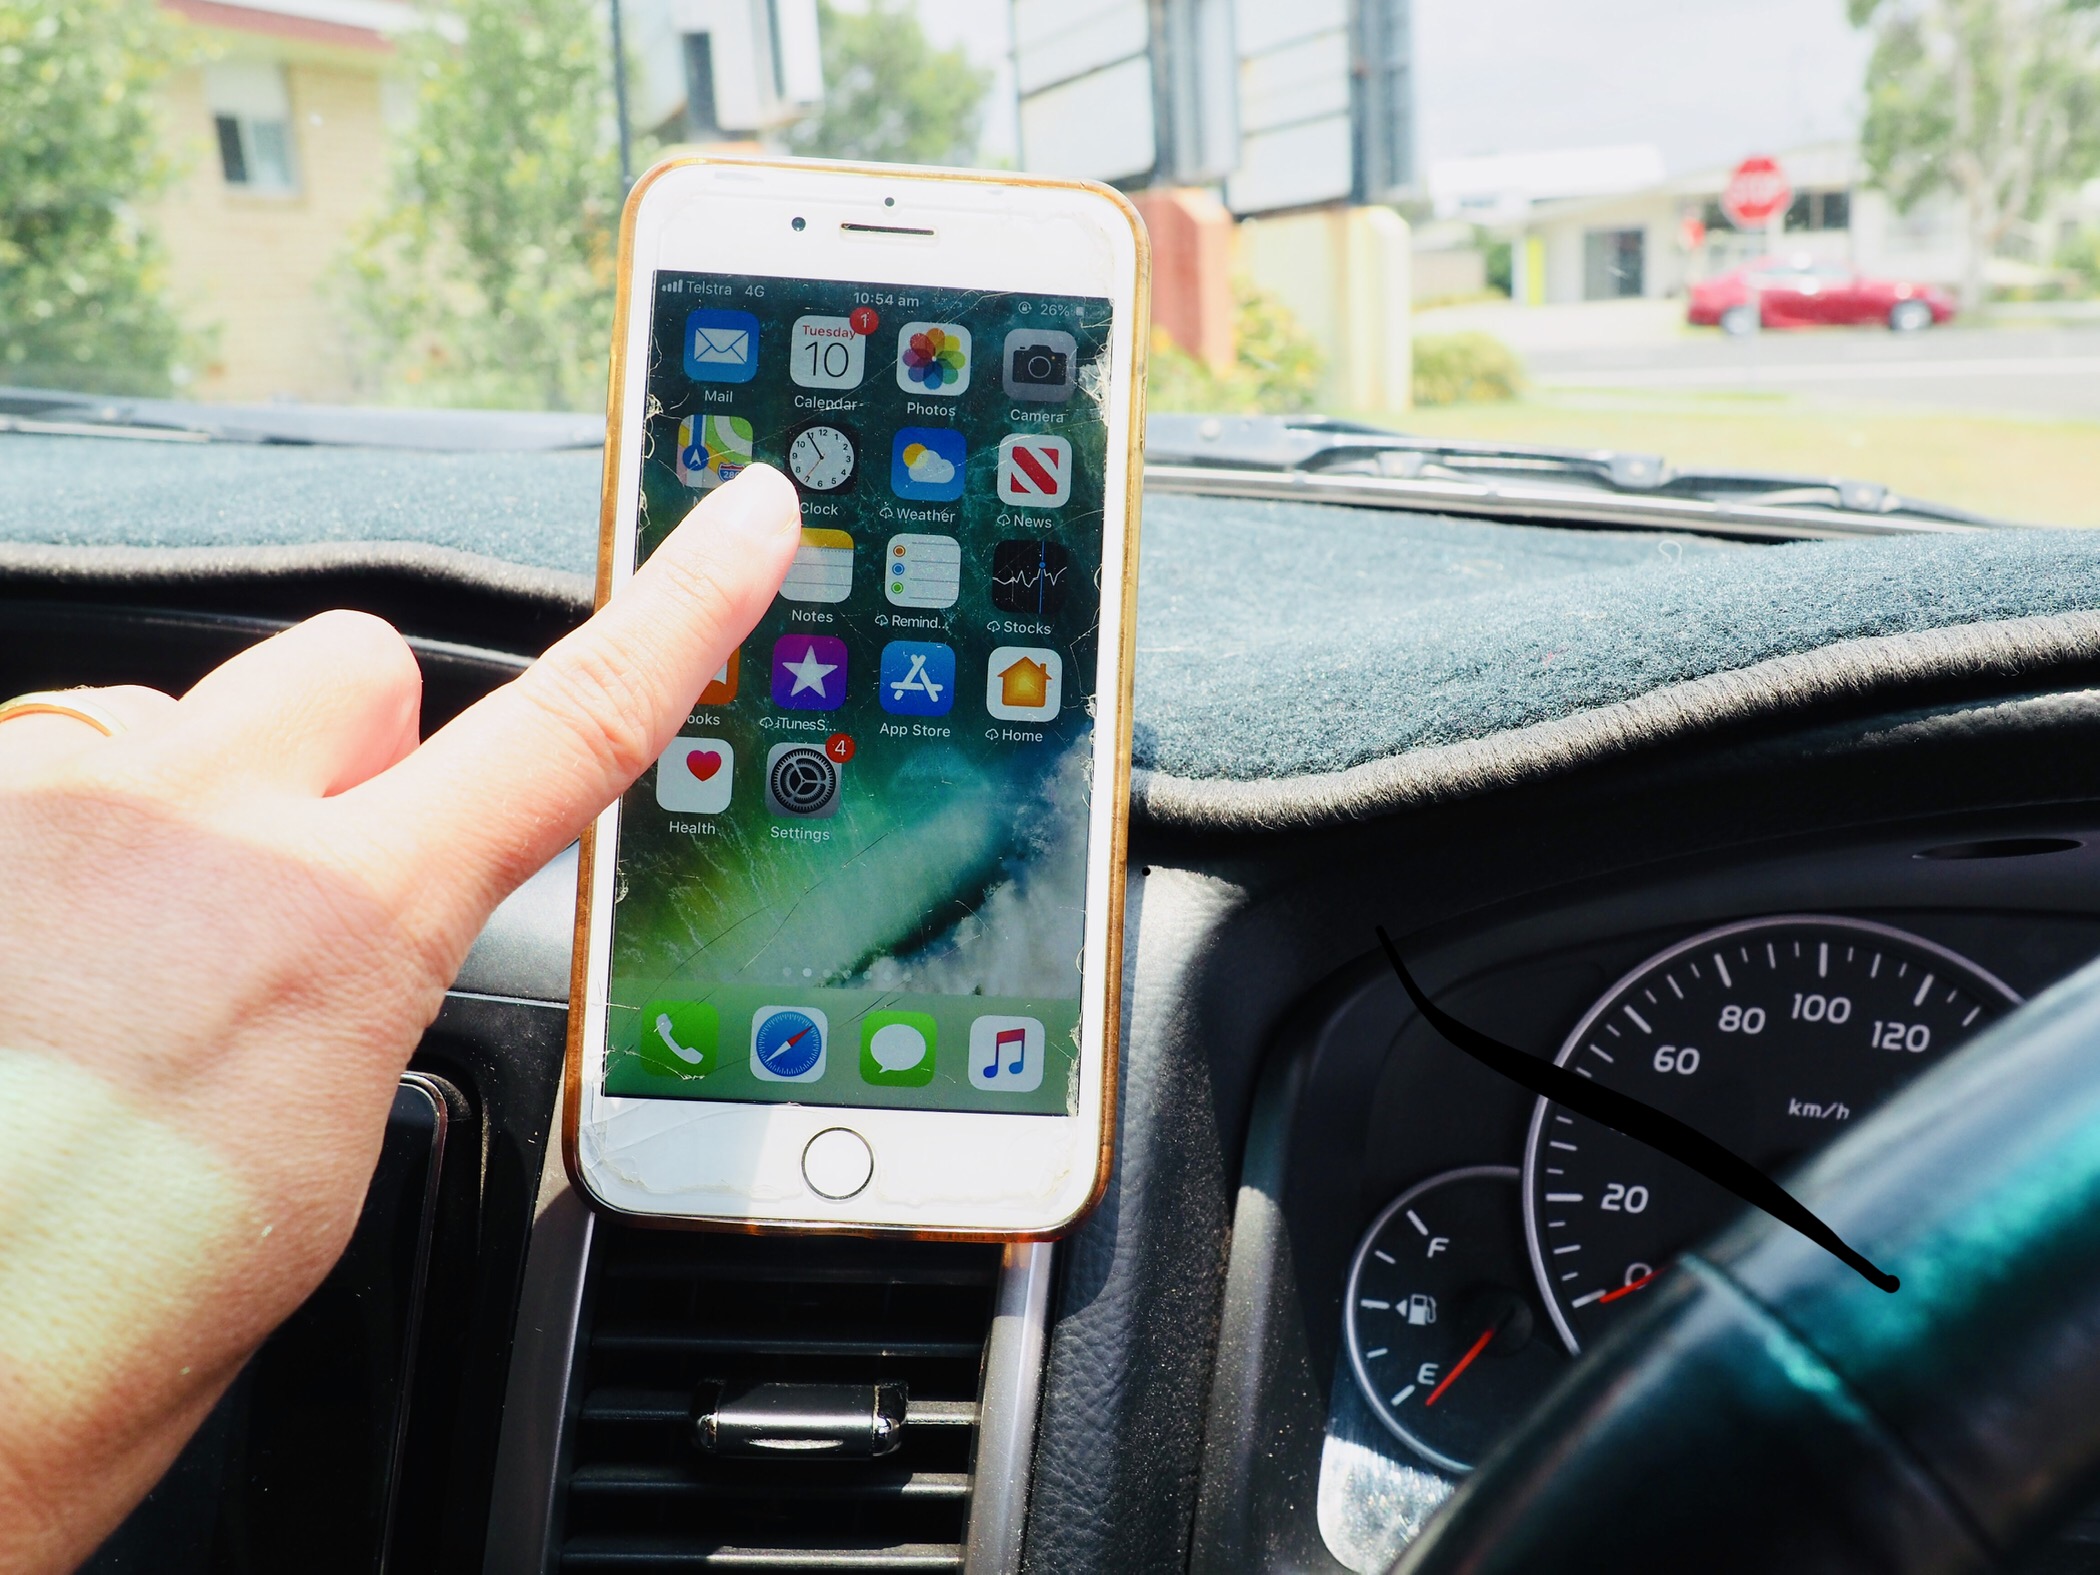 Increased penalties for mobile phone offences and how we can help you find a safe solution